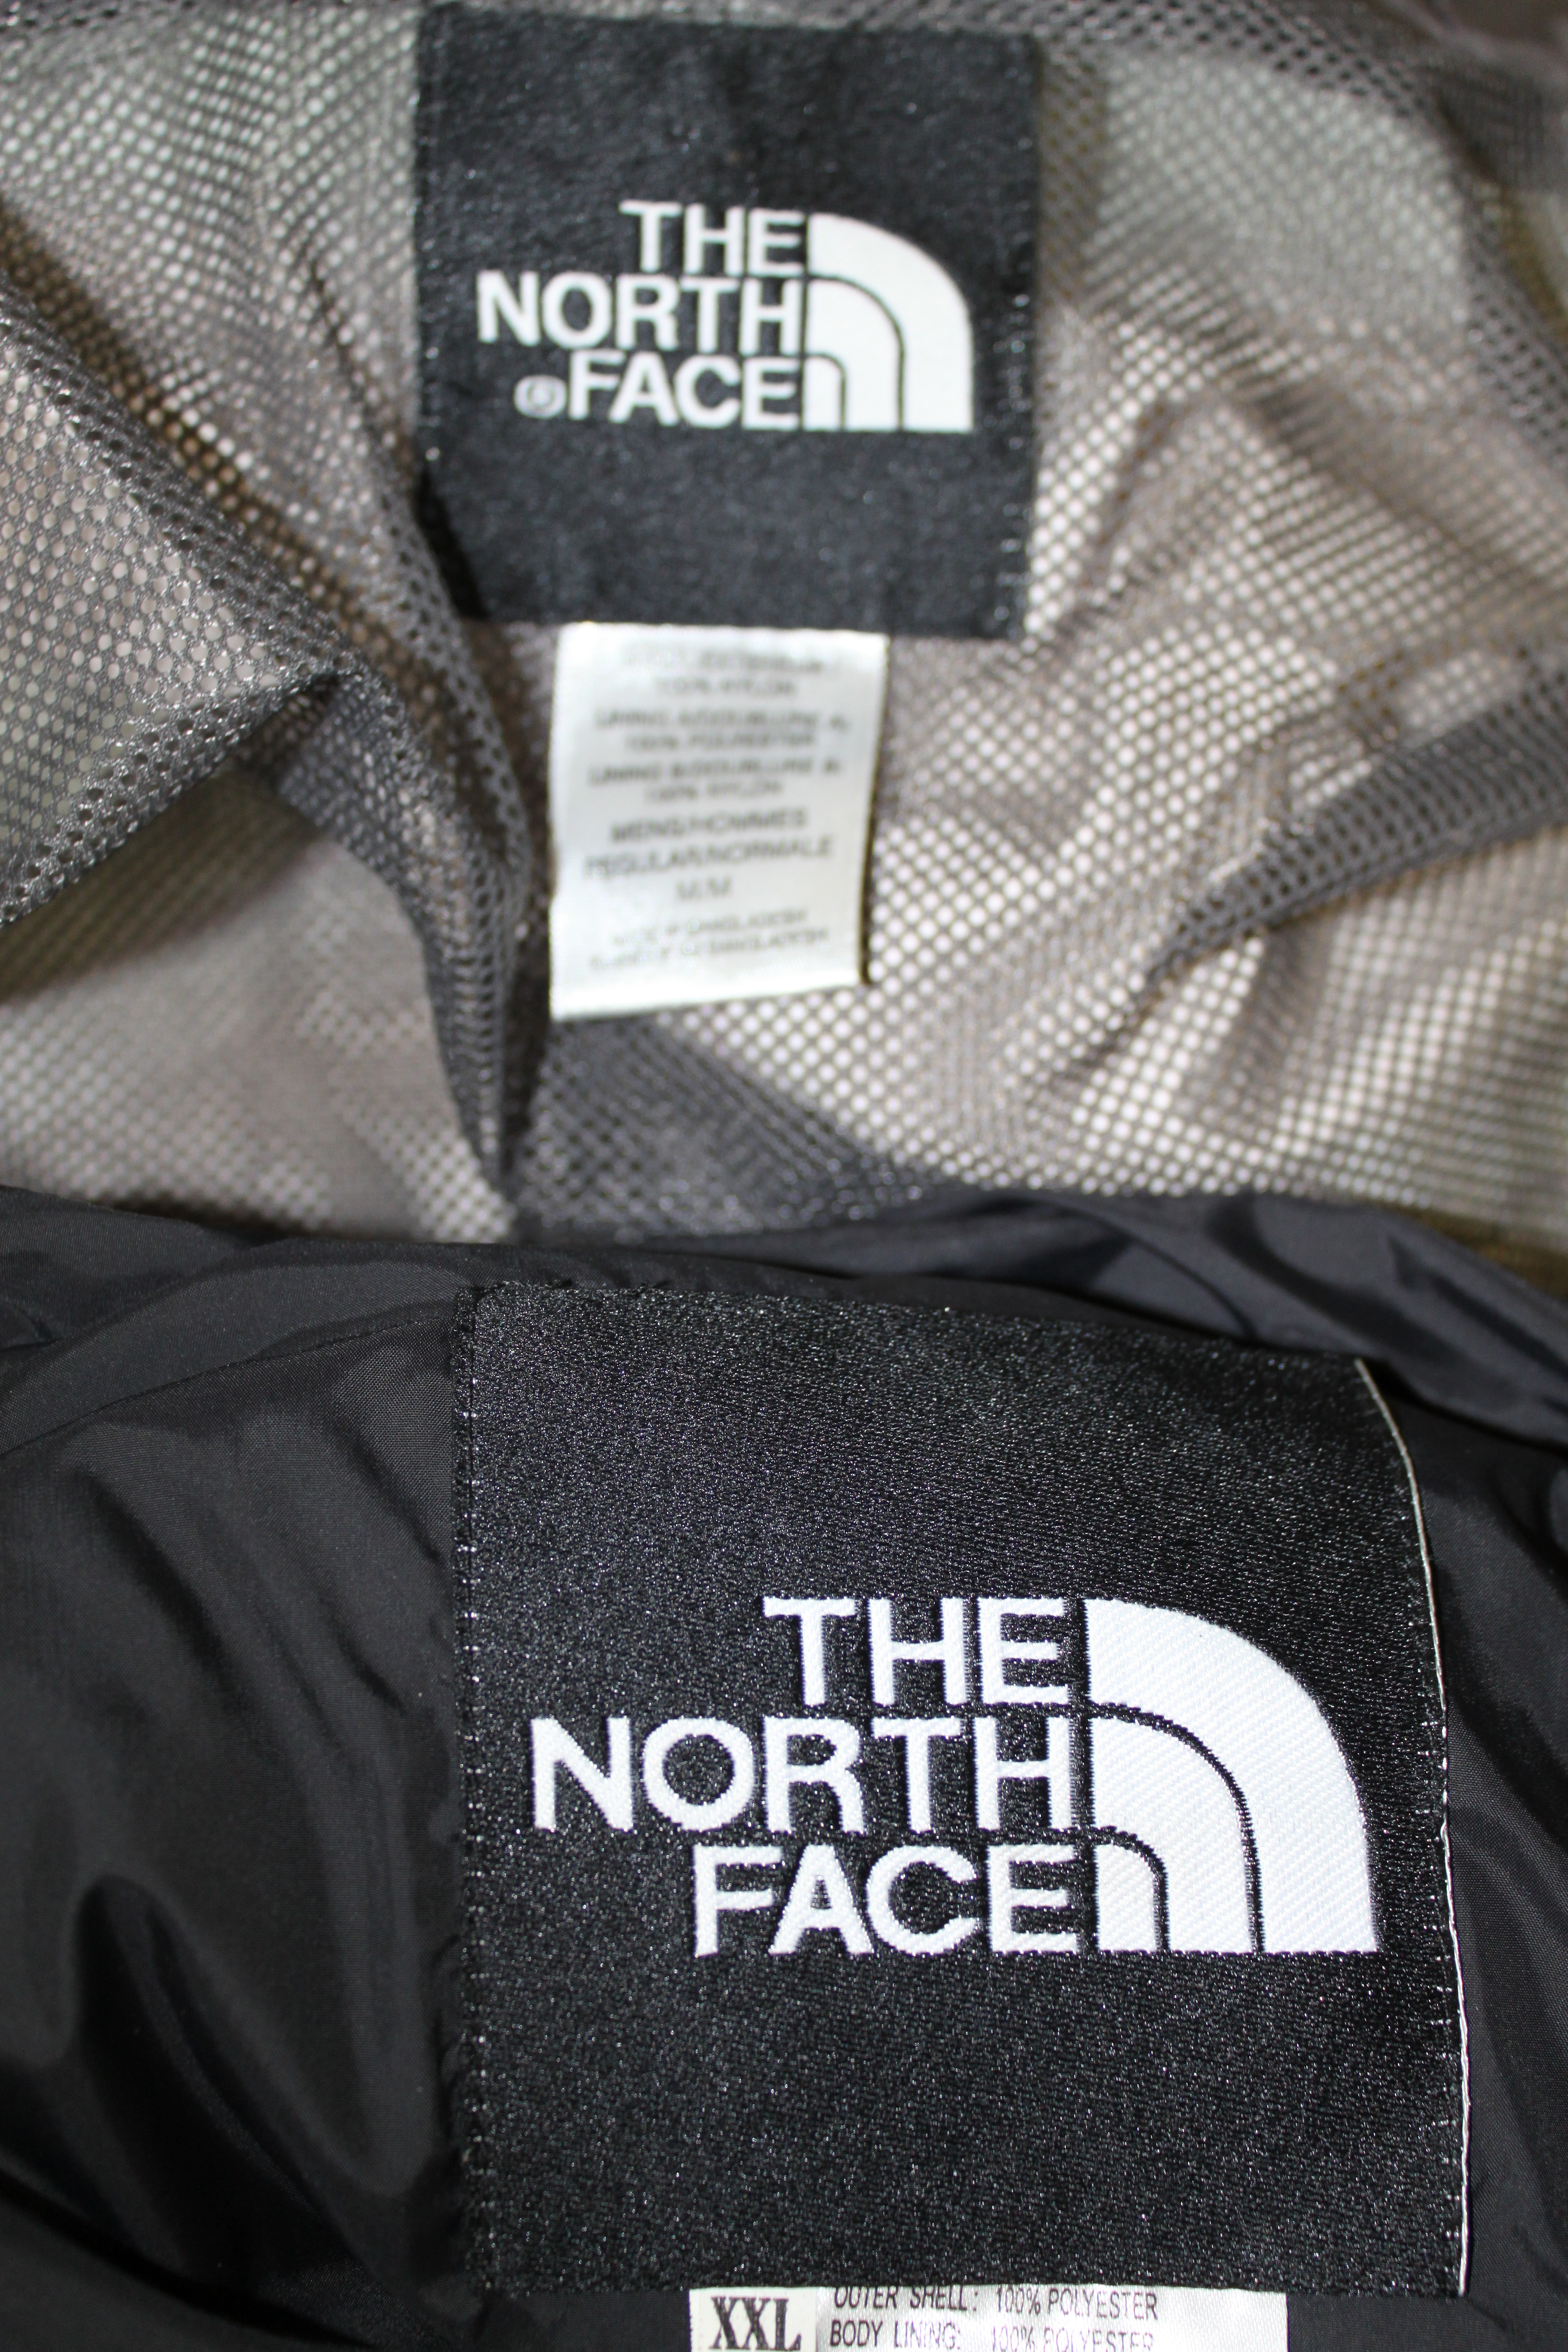 replica north face jackets uk